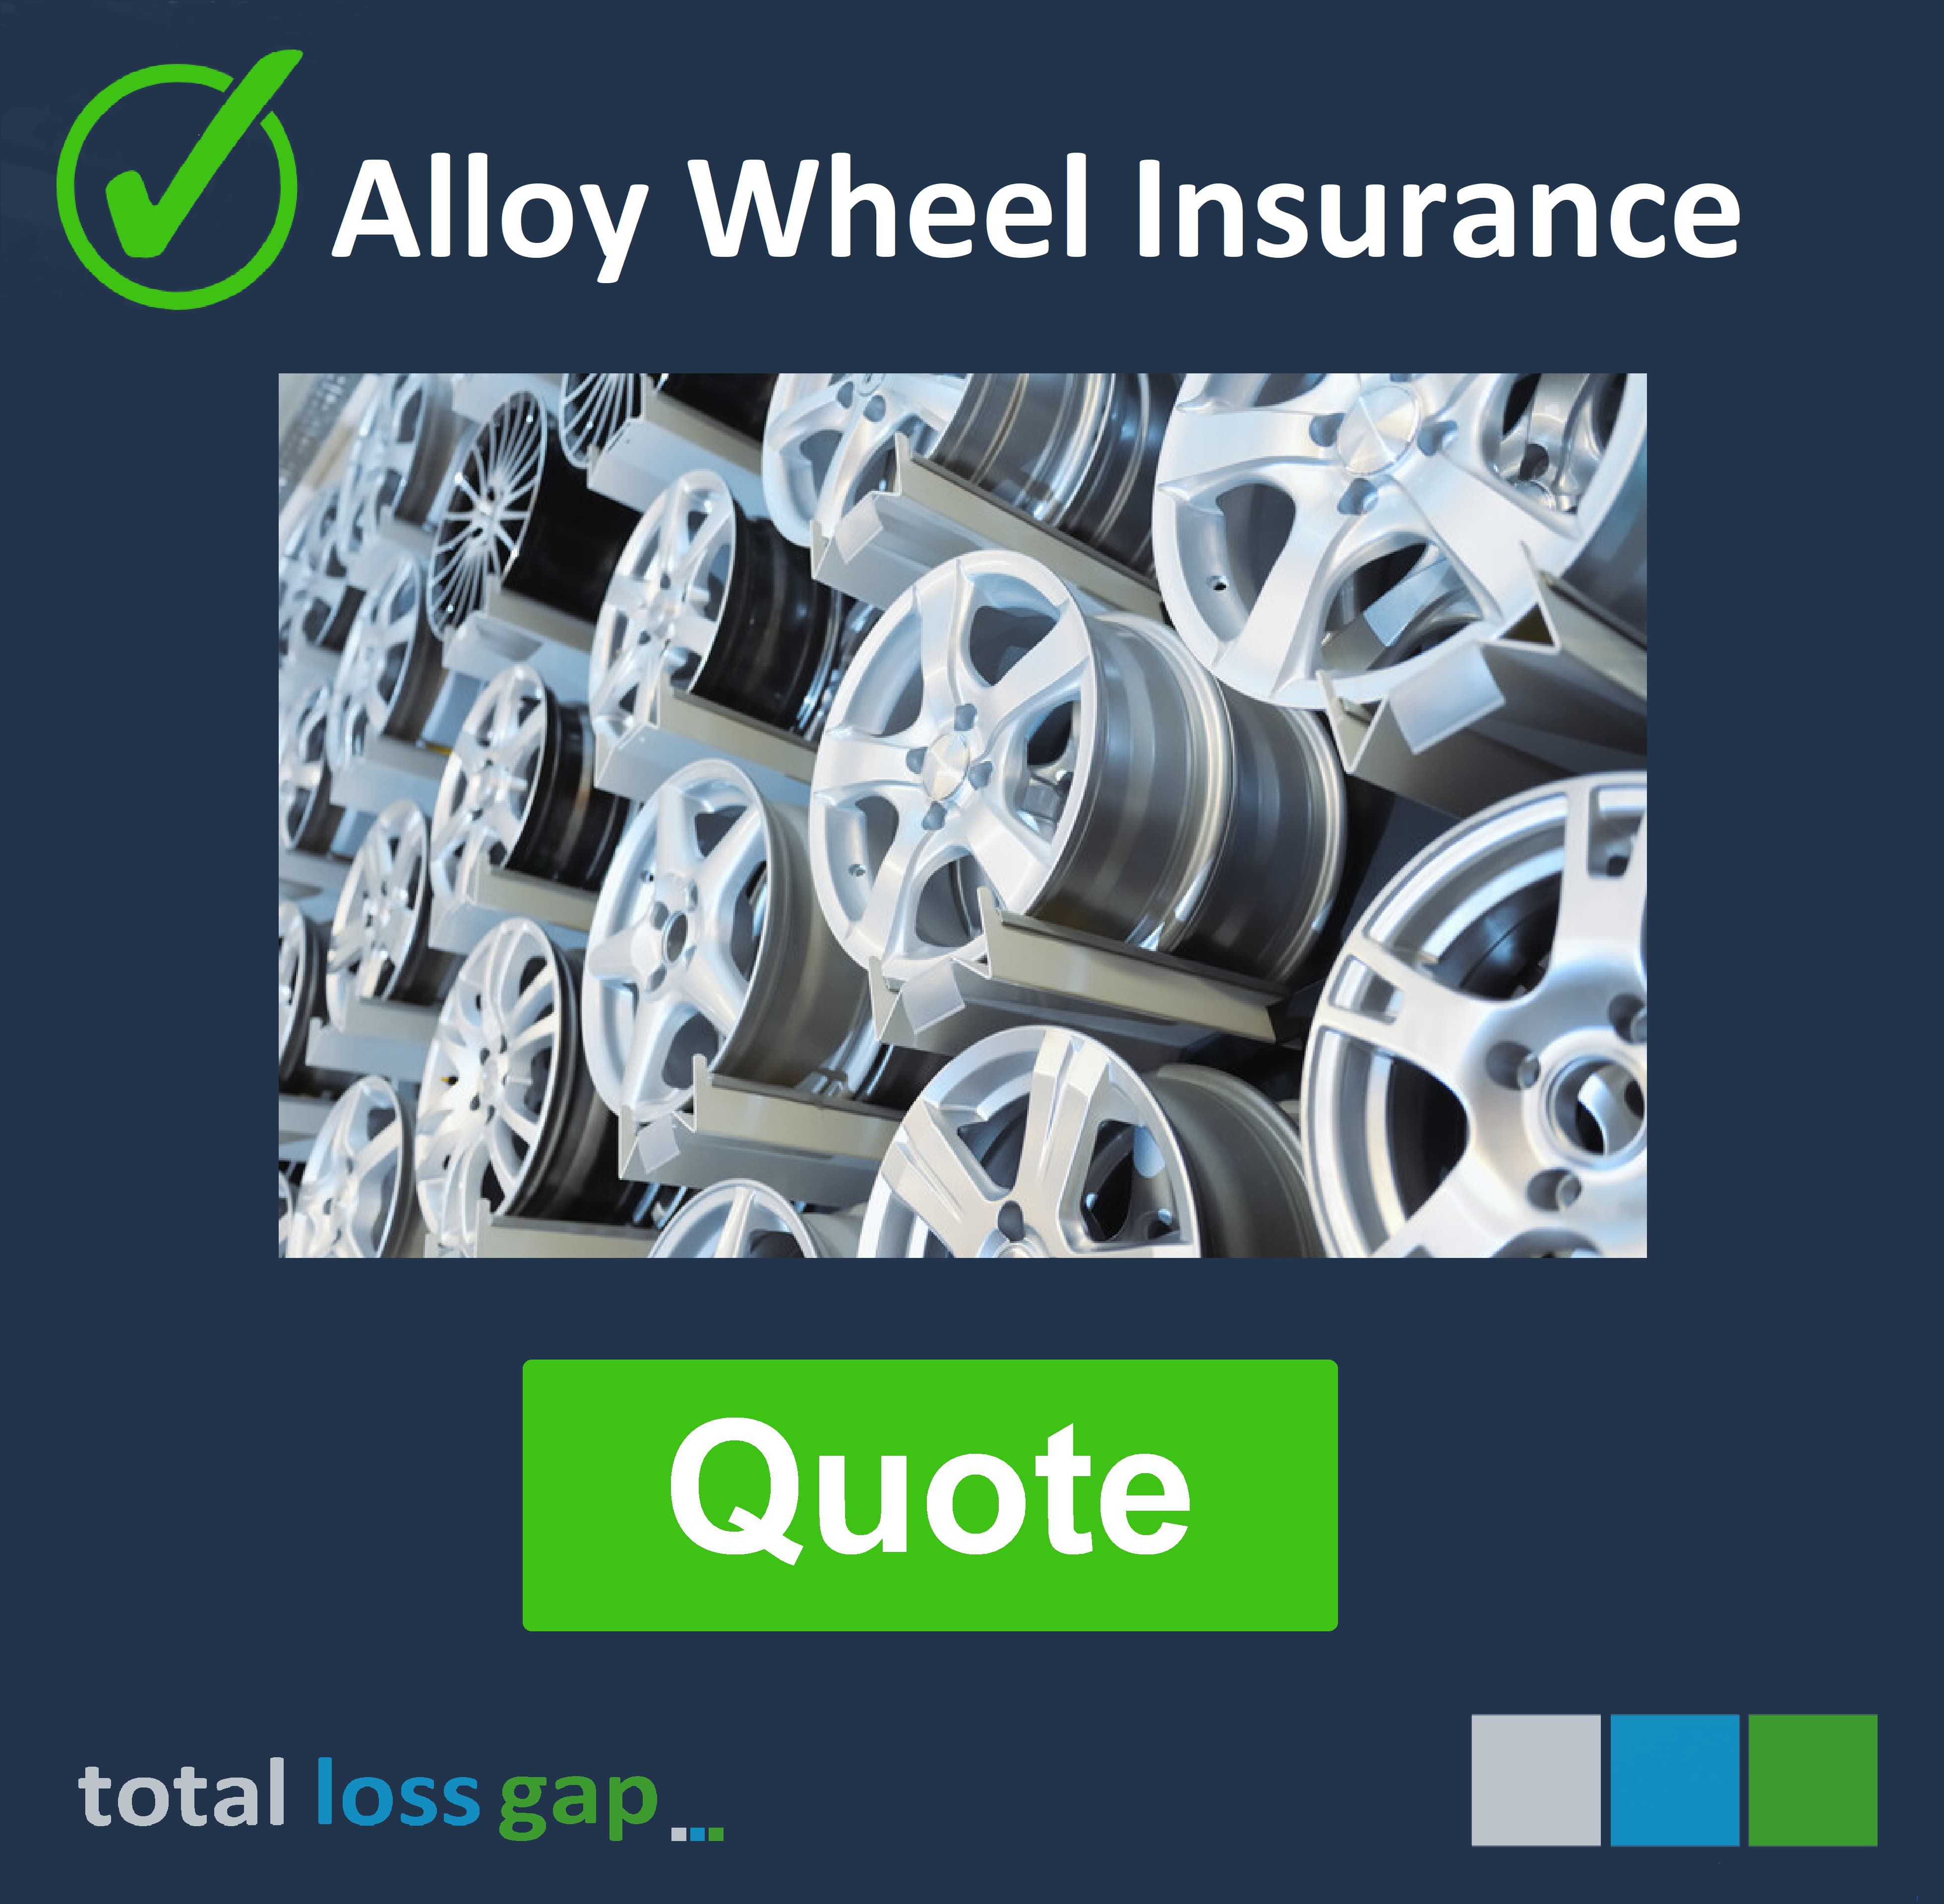 Alloy Wheel Insurance for your Audi